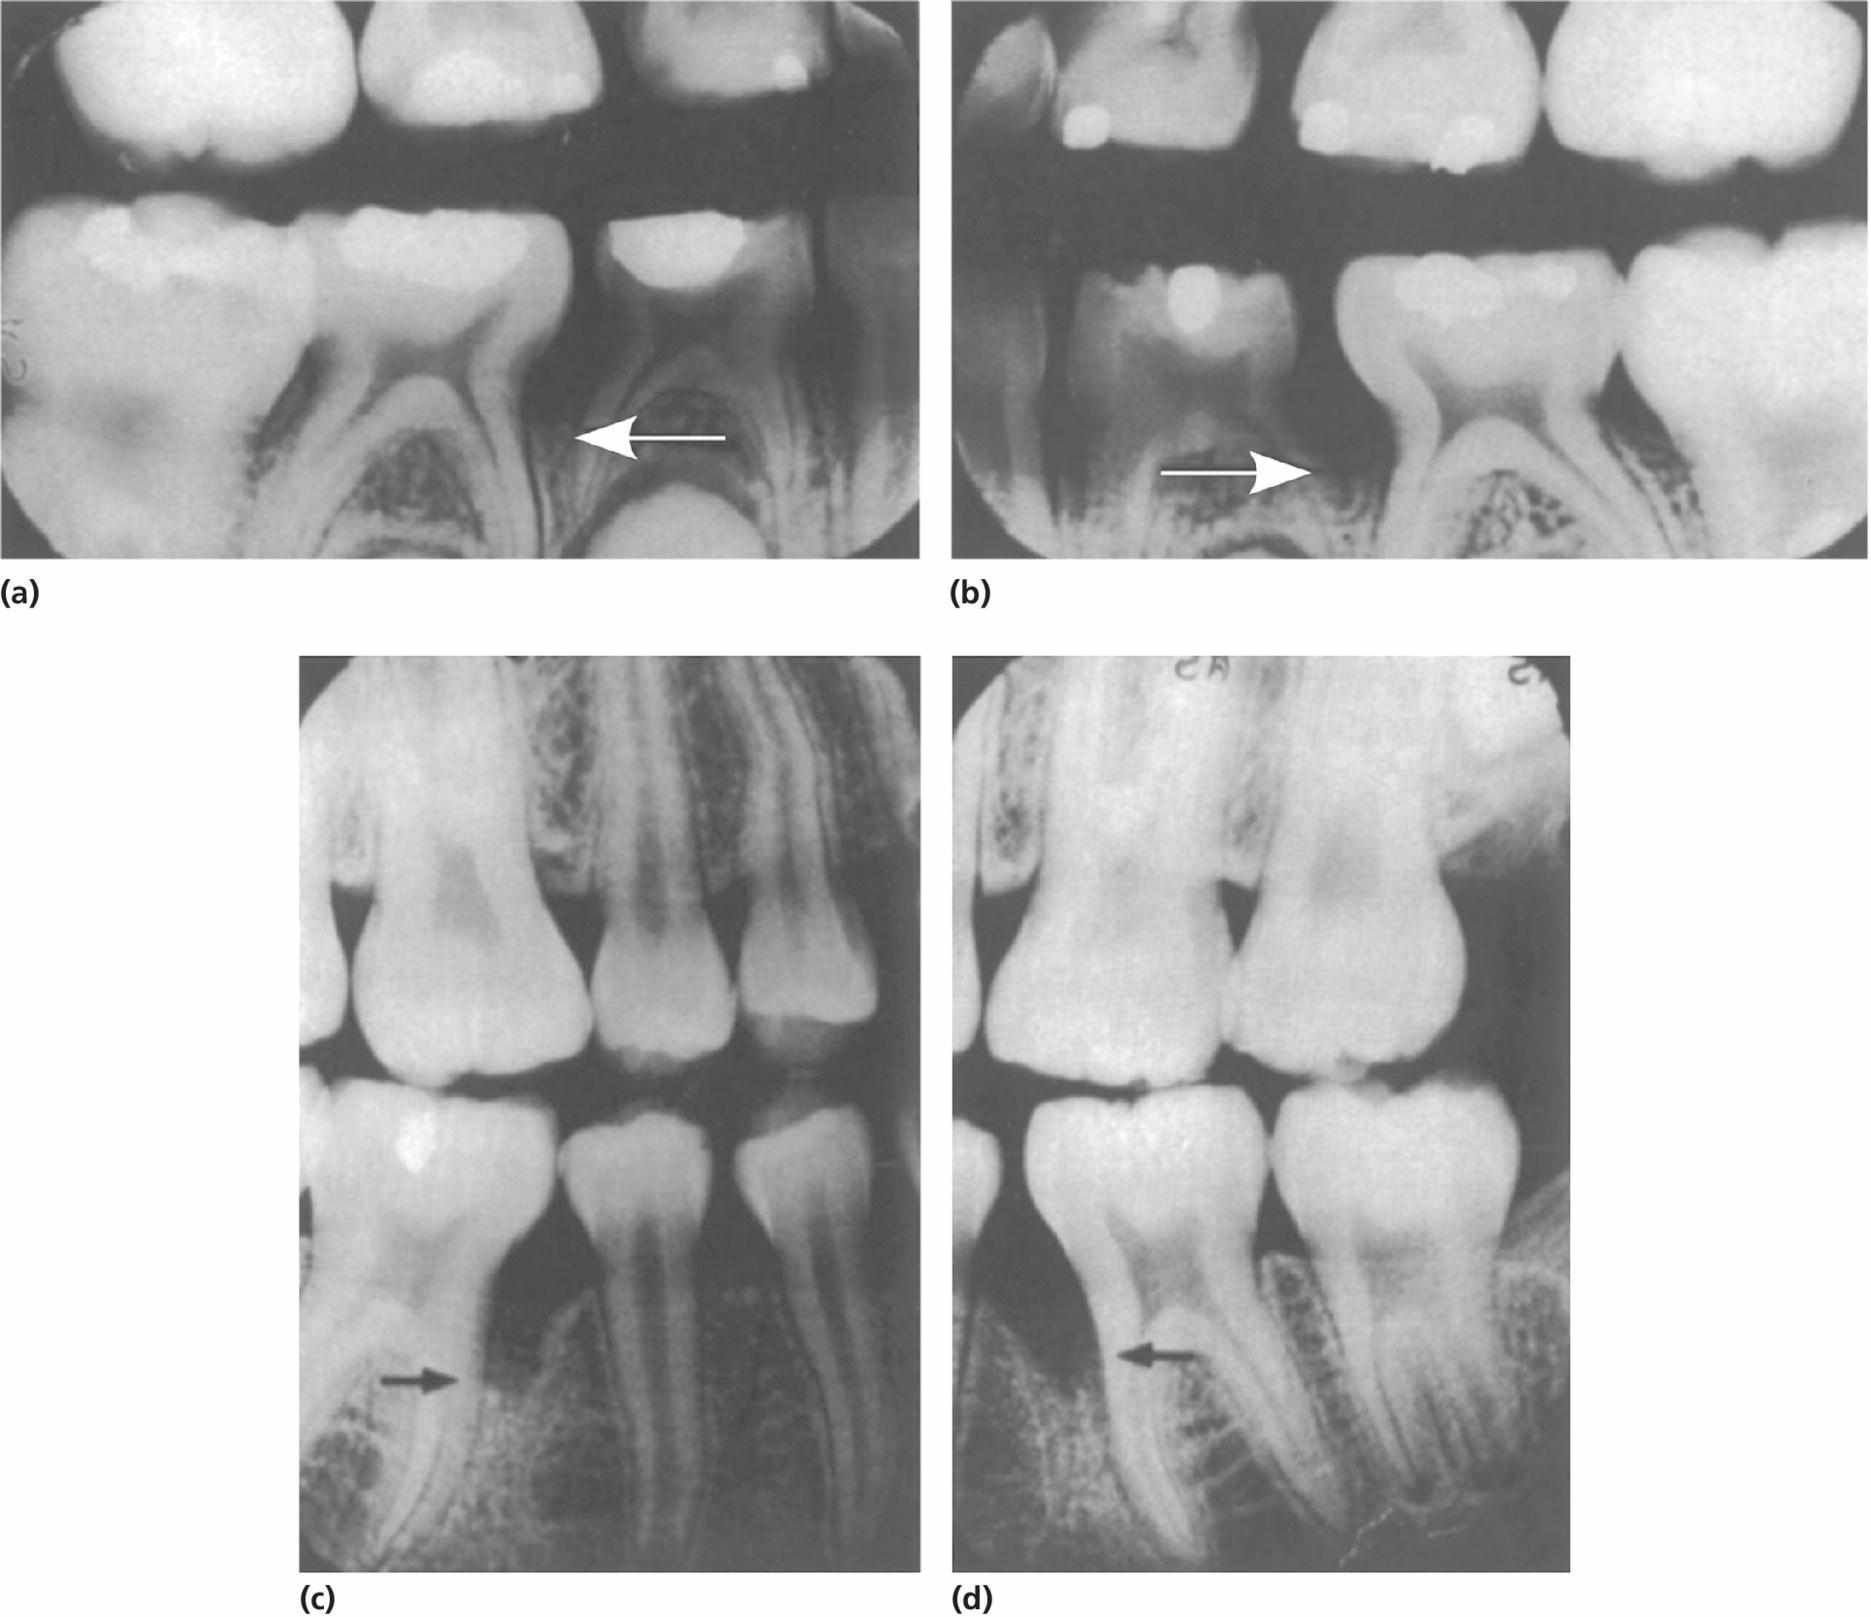 Dental radiographs of a 14-year-old boy presenting loss of bone support with arrows pointing the location (a, b) that developed into localized aggressive periodontitis (c,d).